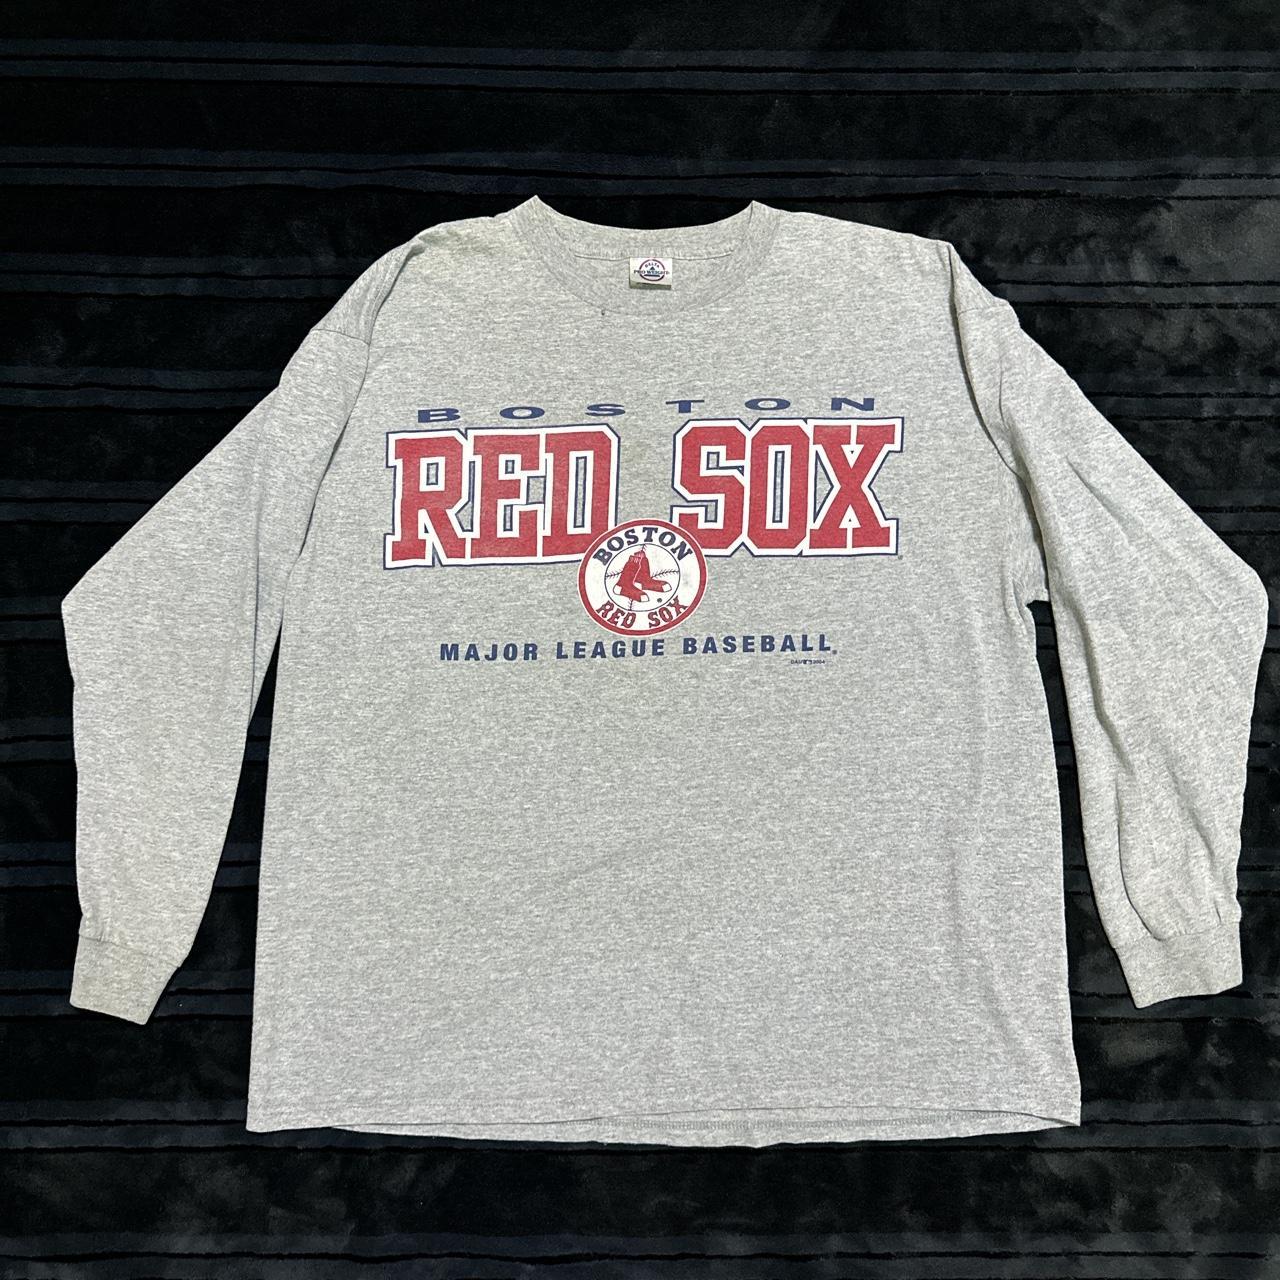 2004 Boston Red Sox shirt , Size XL, Flaws shown in